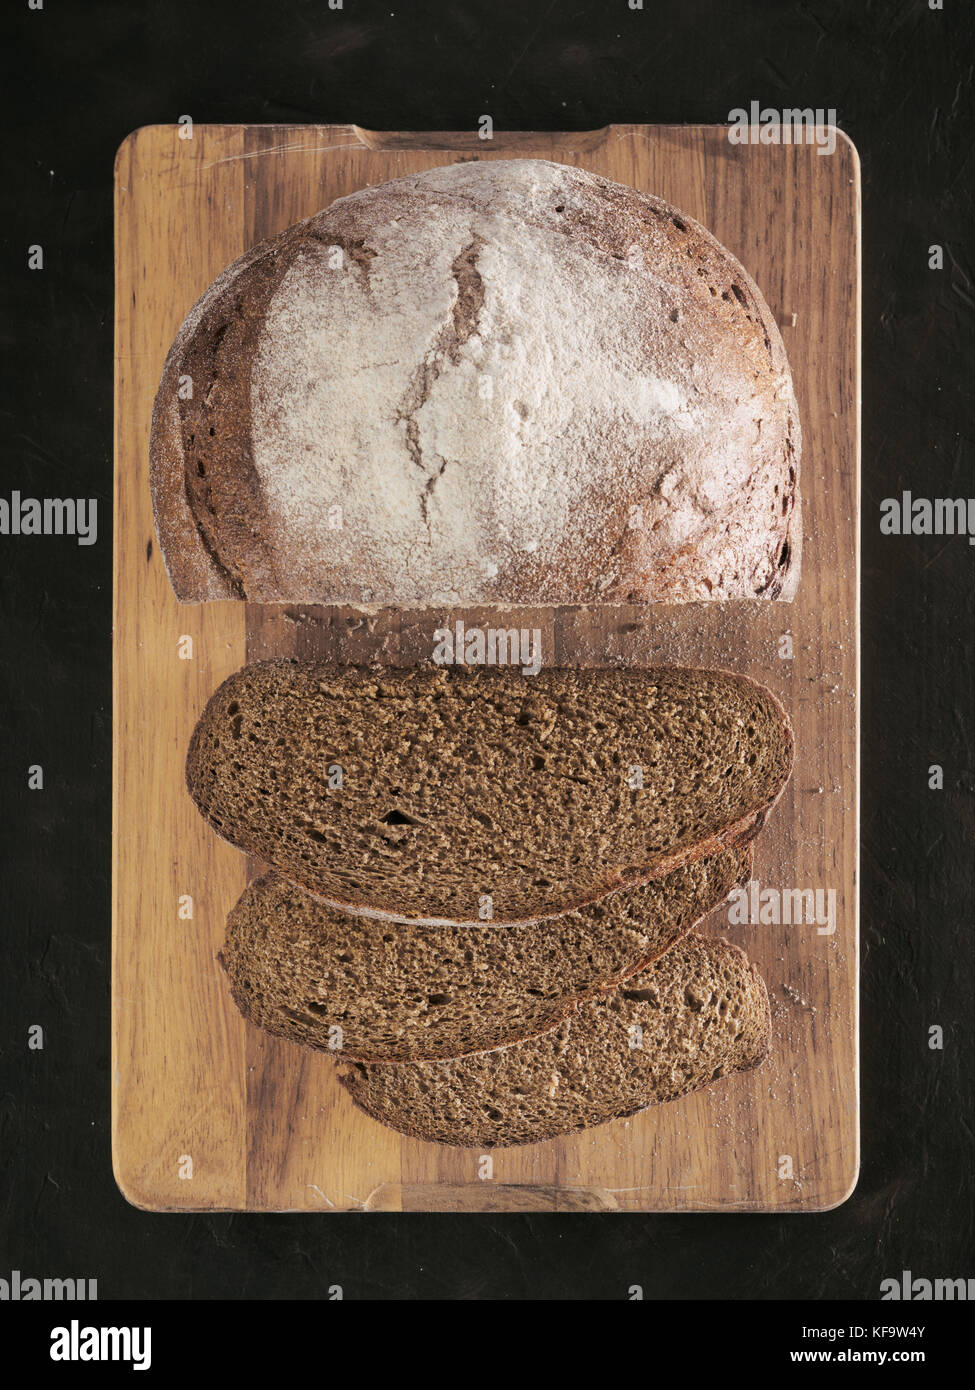 Sliced homemade sourdough rye bread on cutting board over black textured background with rye flour. Top view or flat-lay. Low key Stock Photo